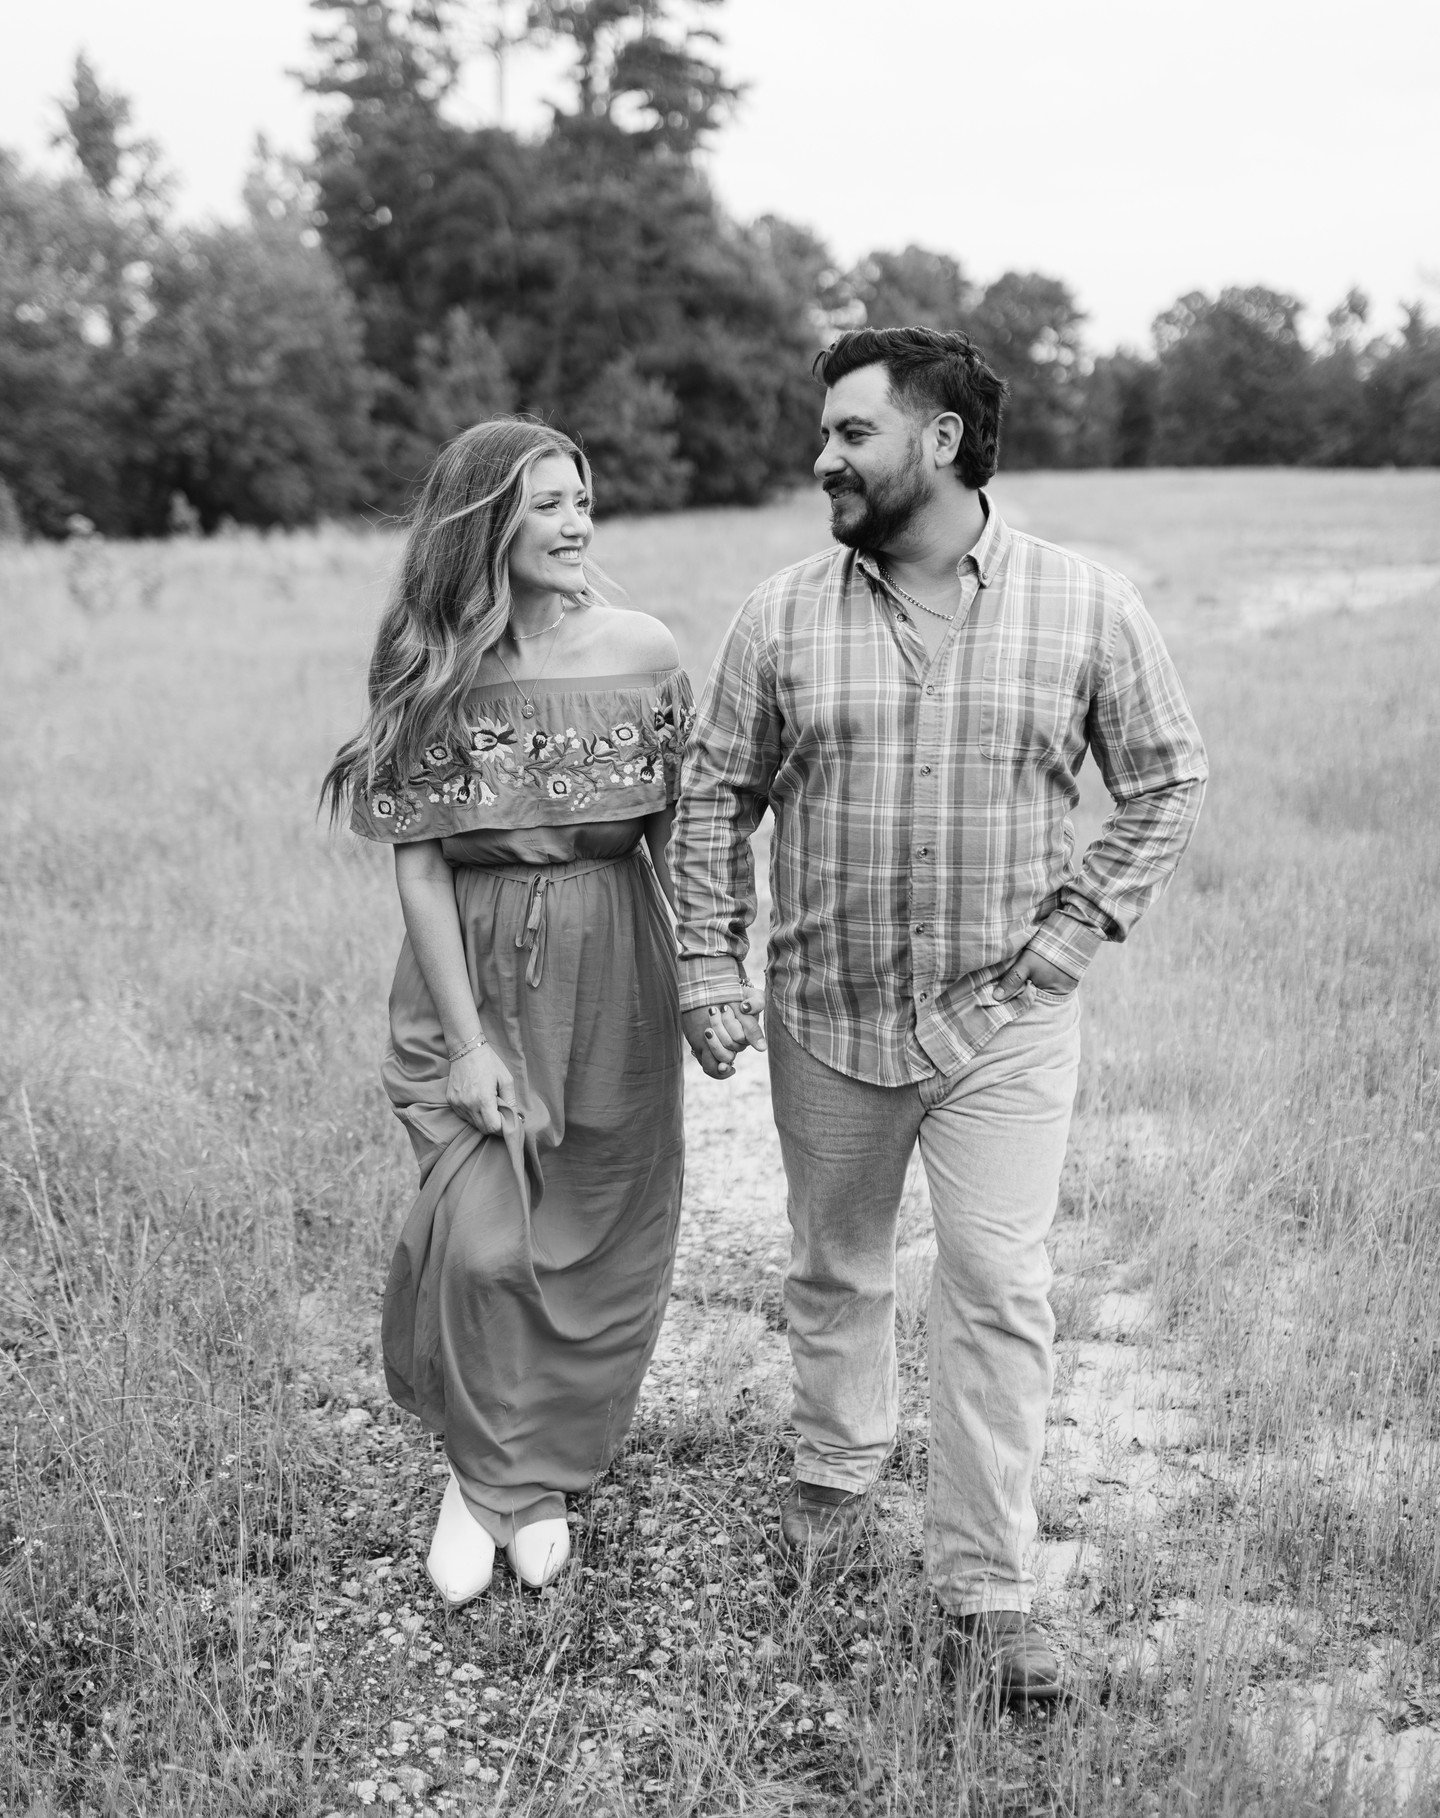 &quot;Hey let's pretend y'all are on a stroll with no kids!&quot; I love saving couple shots until the end of a session. It gives parents a time to breathe and connect.
.
.
.
.
#carolineeavesphotography #blackandwhite